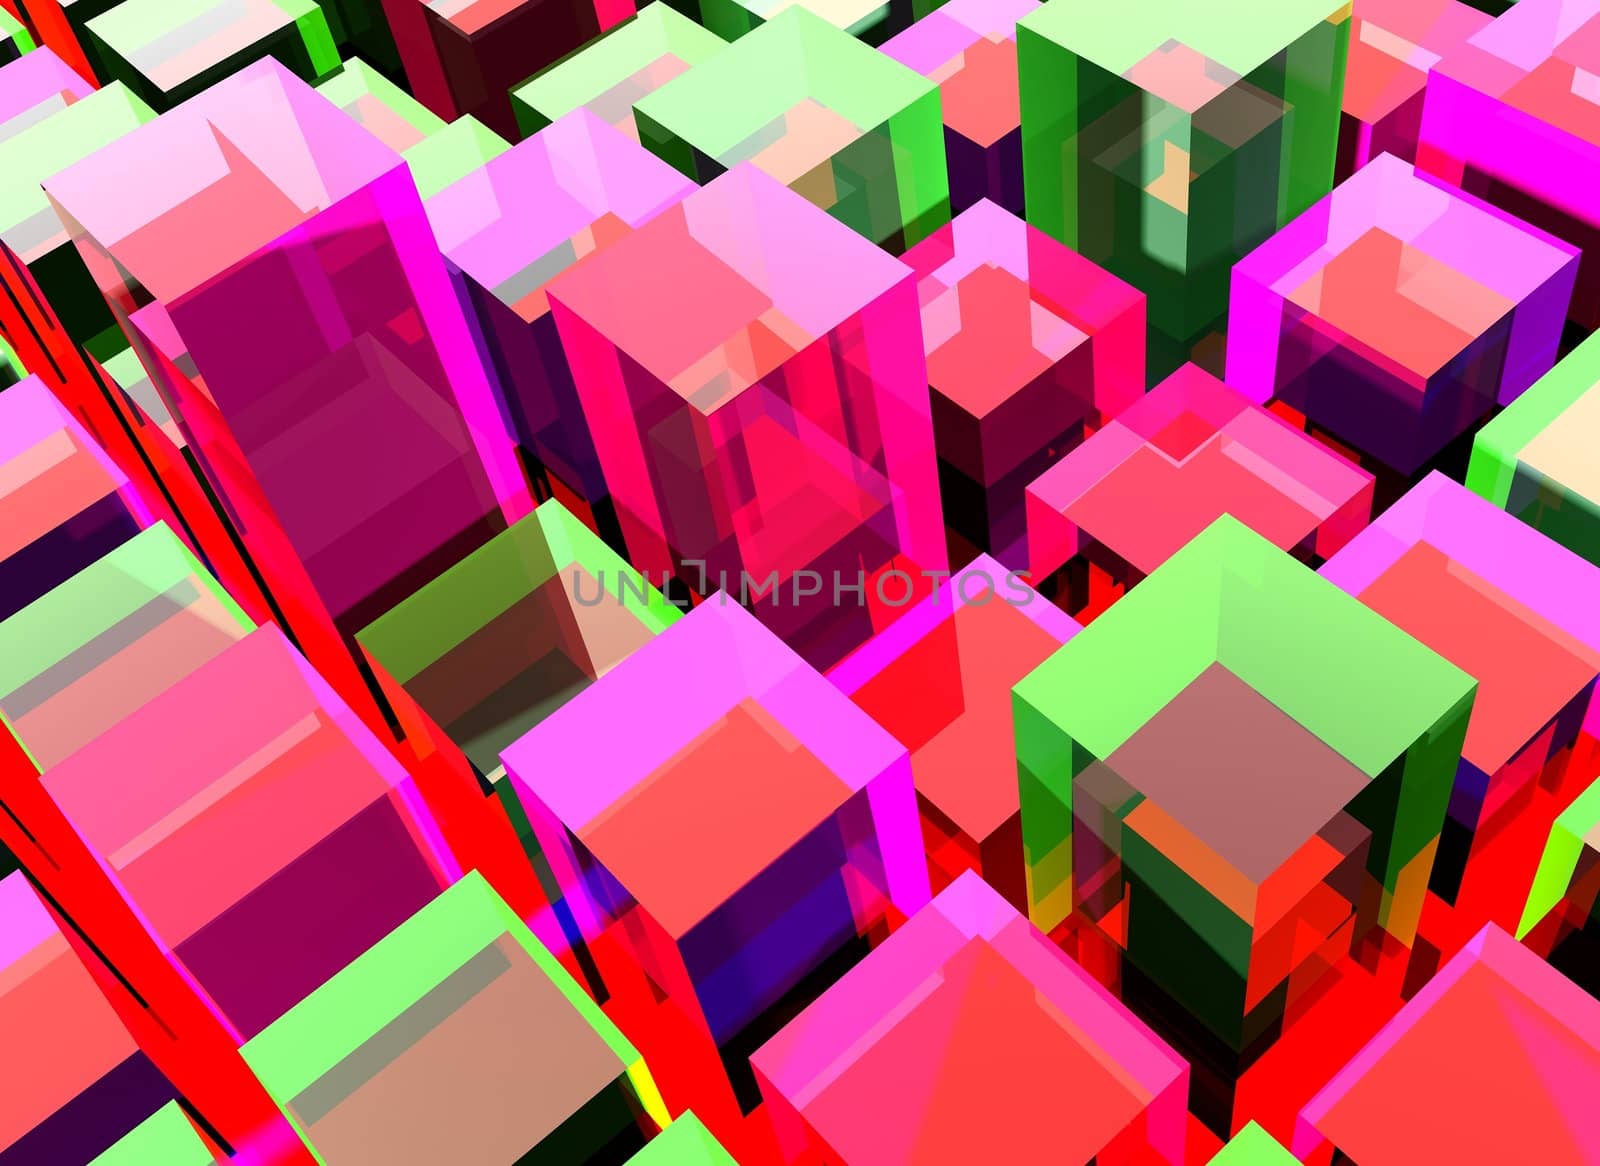 Conceptual abstract background consisting of cubes fulfilling whole area of view. Concept is rendered with slight reflections. Cubes are portrayed in various sizes and mostly in red to pink color blending with slight green reflections.